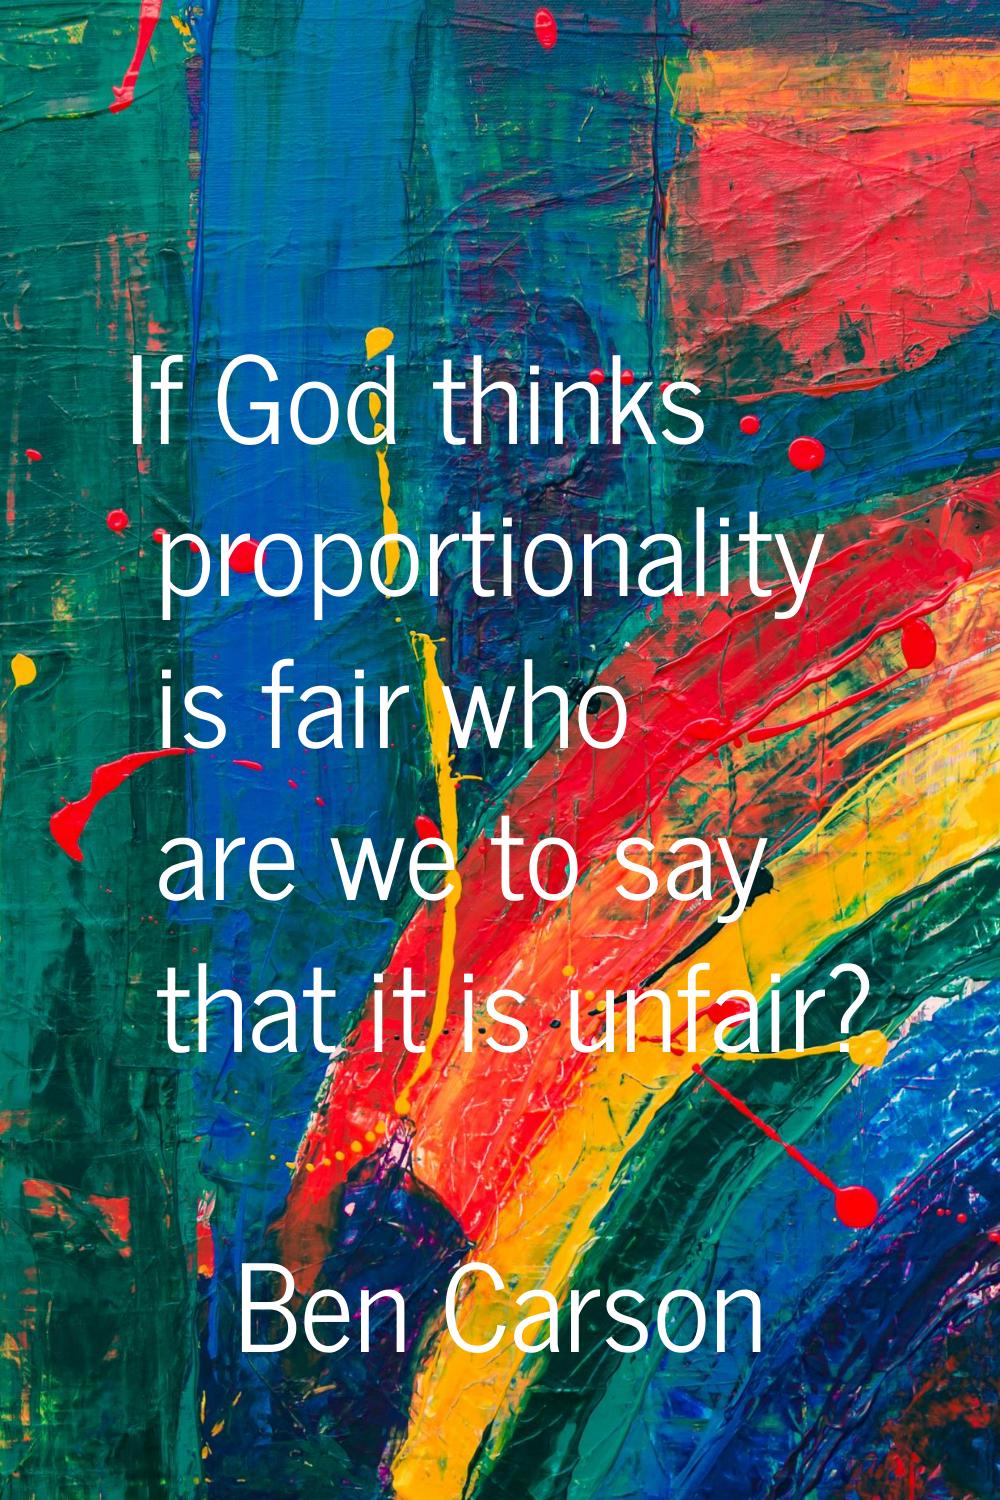 If God thinks proportionality is fair who are we to say that it is unfair?